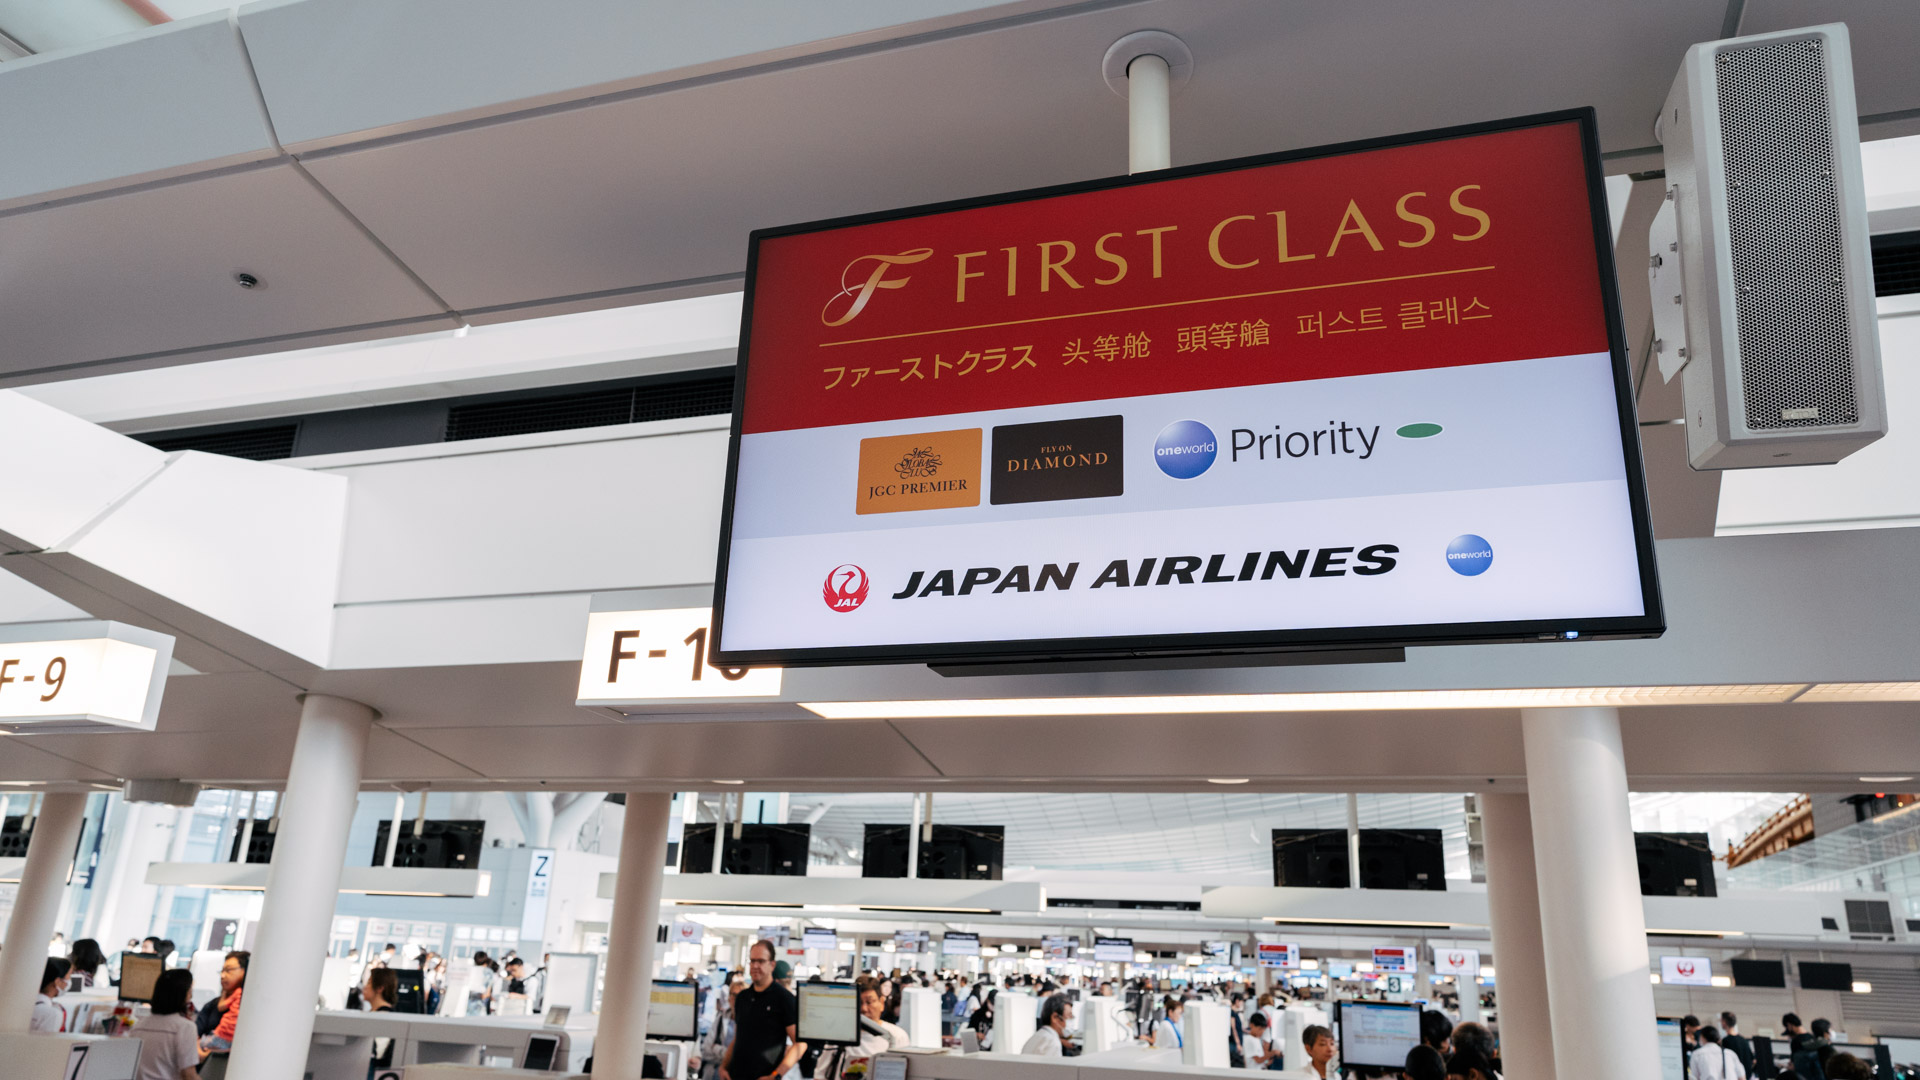 Japan Airlines Boeing 777 First Class check-in